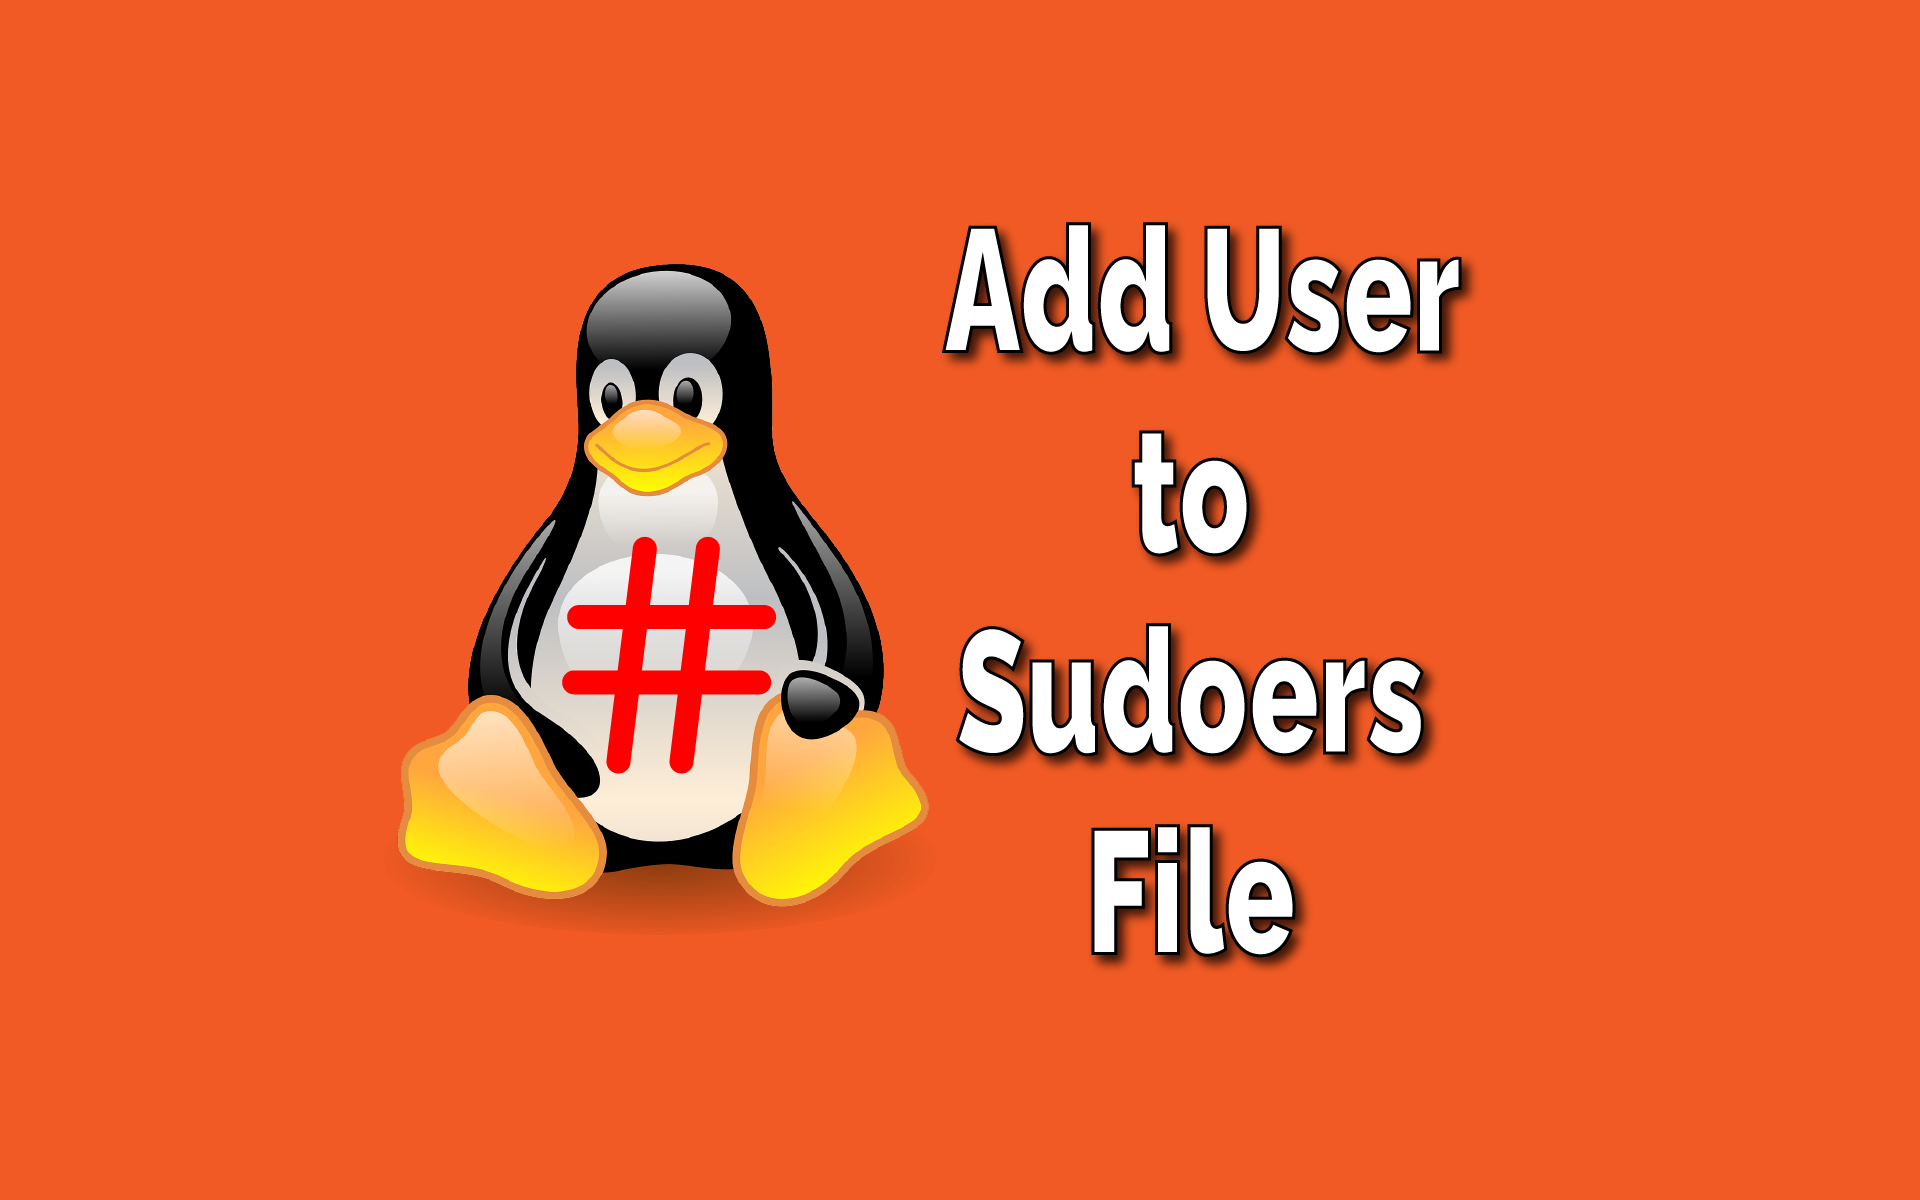 How To Add User To Sudoers File On Linux? - Techsphinx